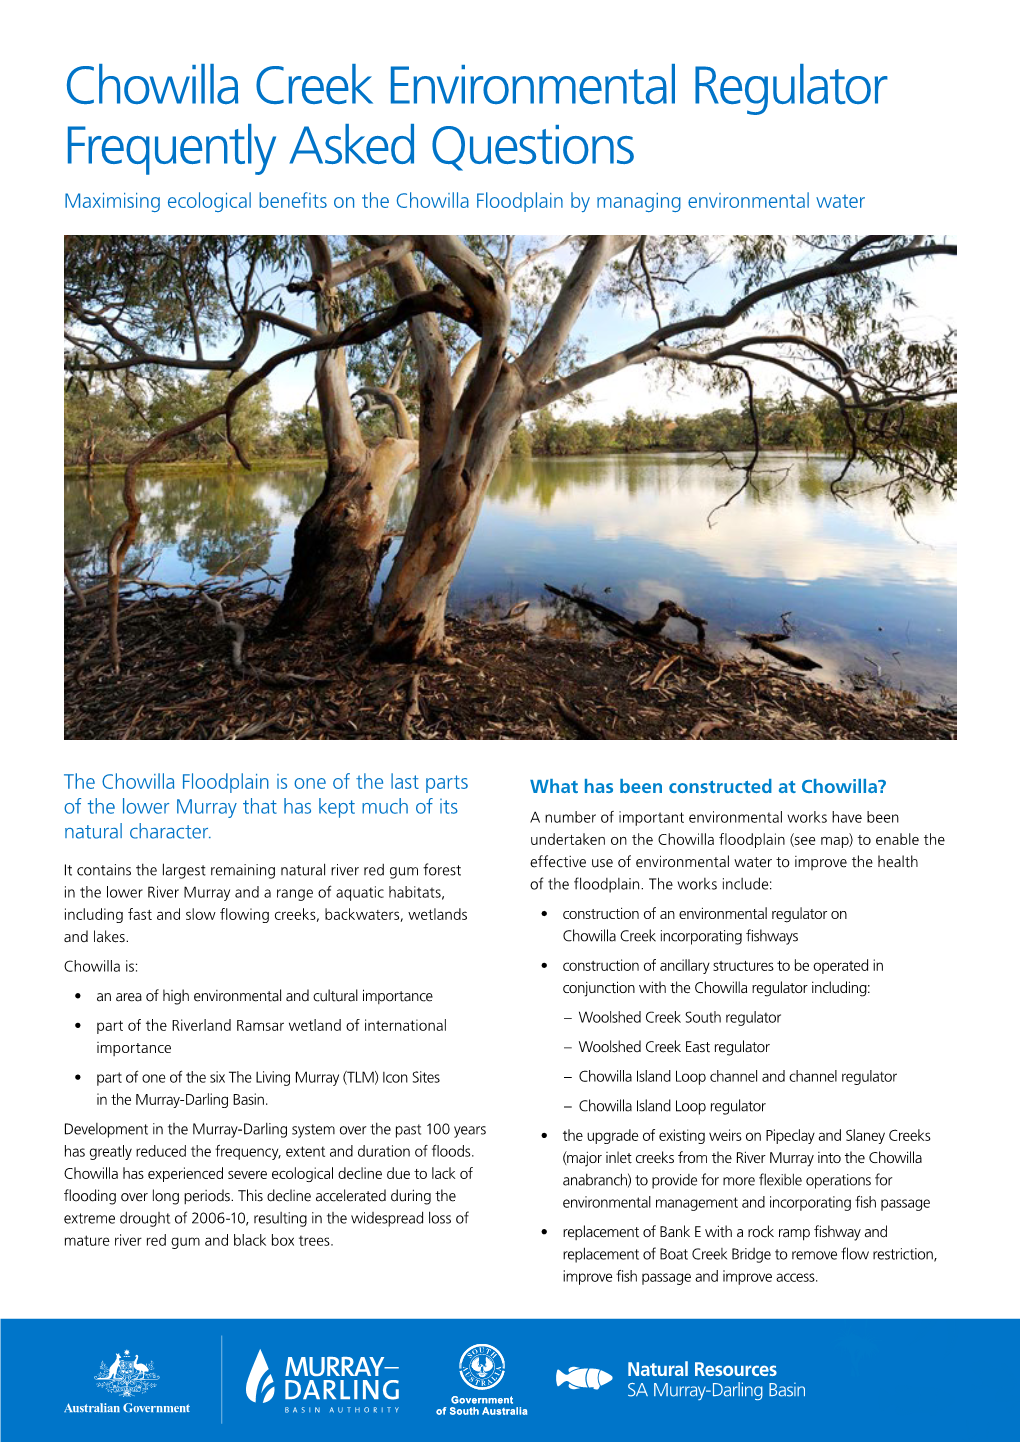 Chowilla Creek Environmental Regulator Frequently Asked Questions Maximising Ecological Benefits on the Chowilla Floodplain by Managing Environmental Water